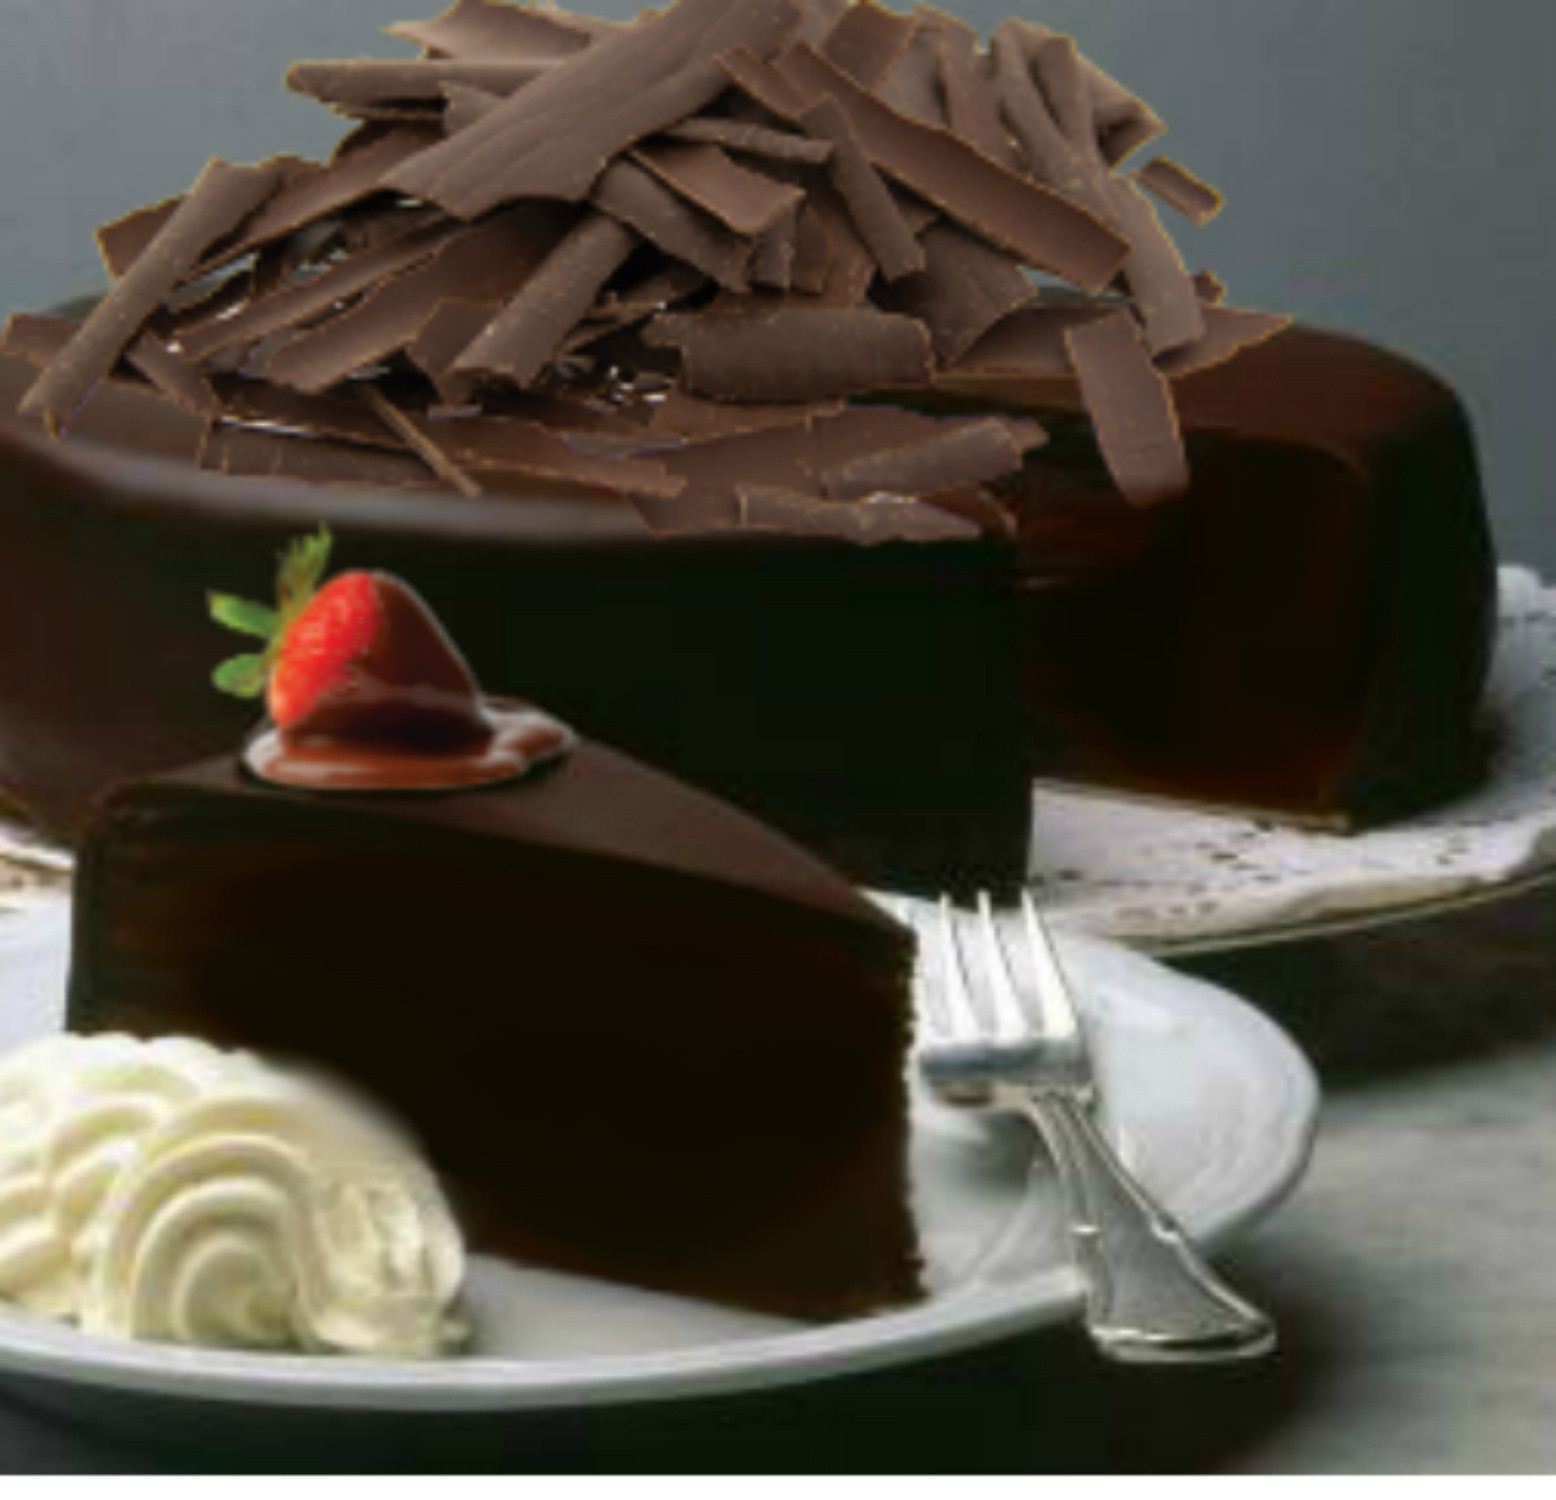 Chocolate Cake Delivery Beautiful the Dark Chocolate Bakery Free Cake Delivery In Frisco